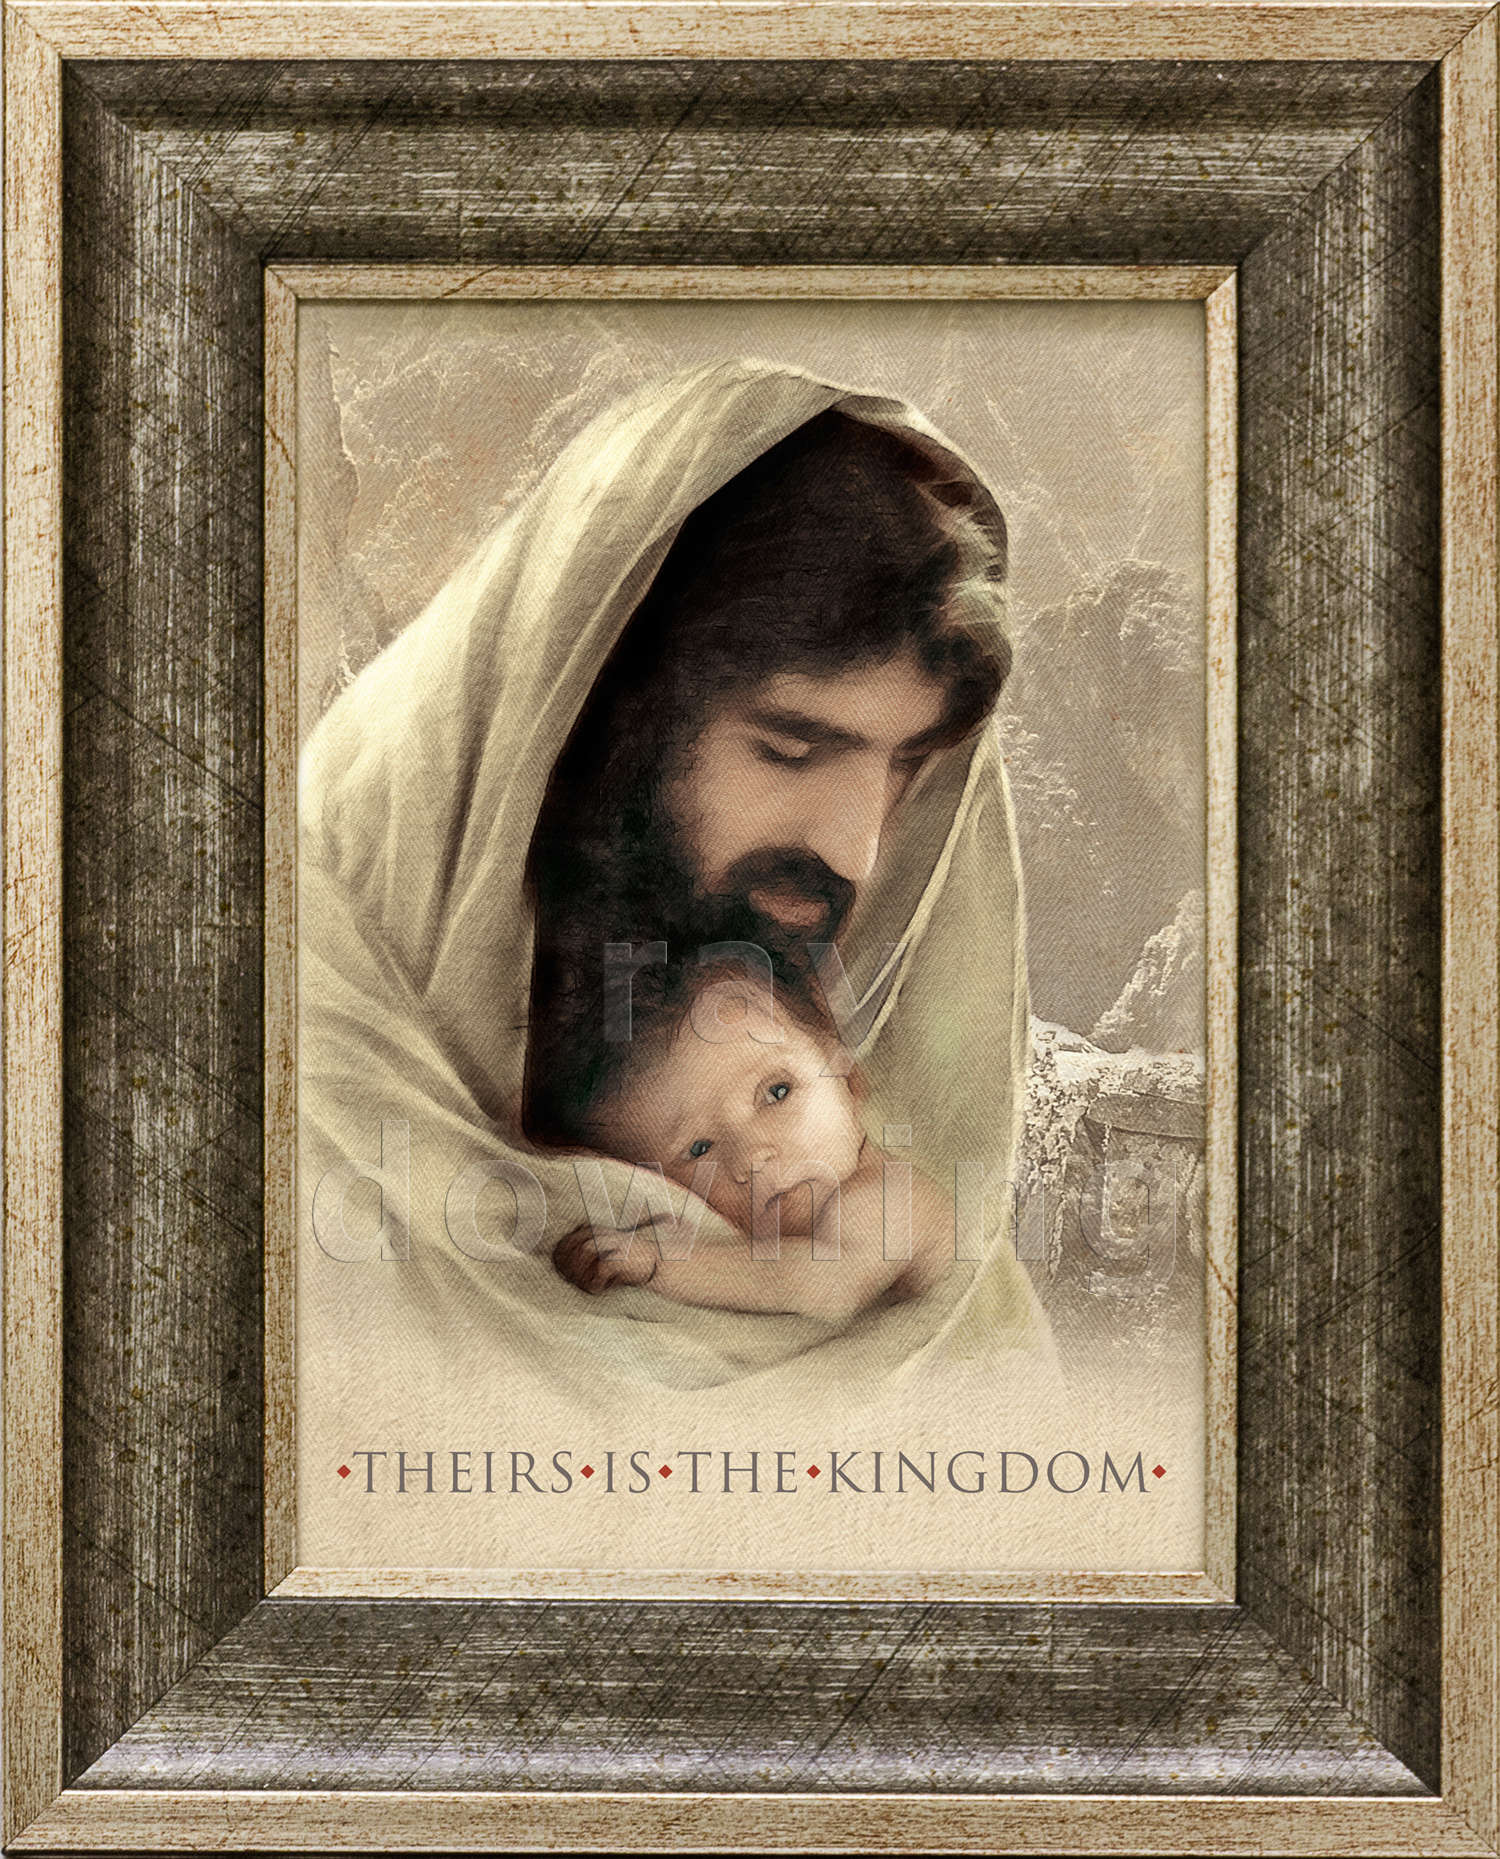 Picture of Jesus Holding a Baby.jpg